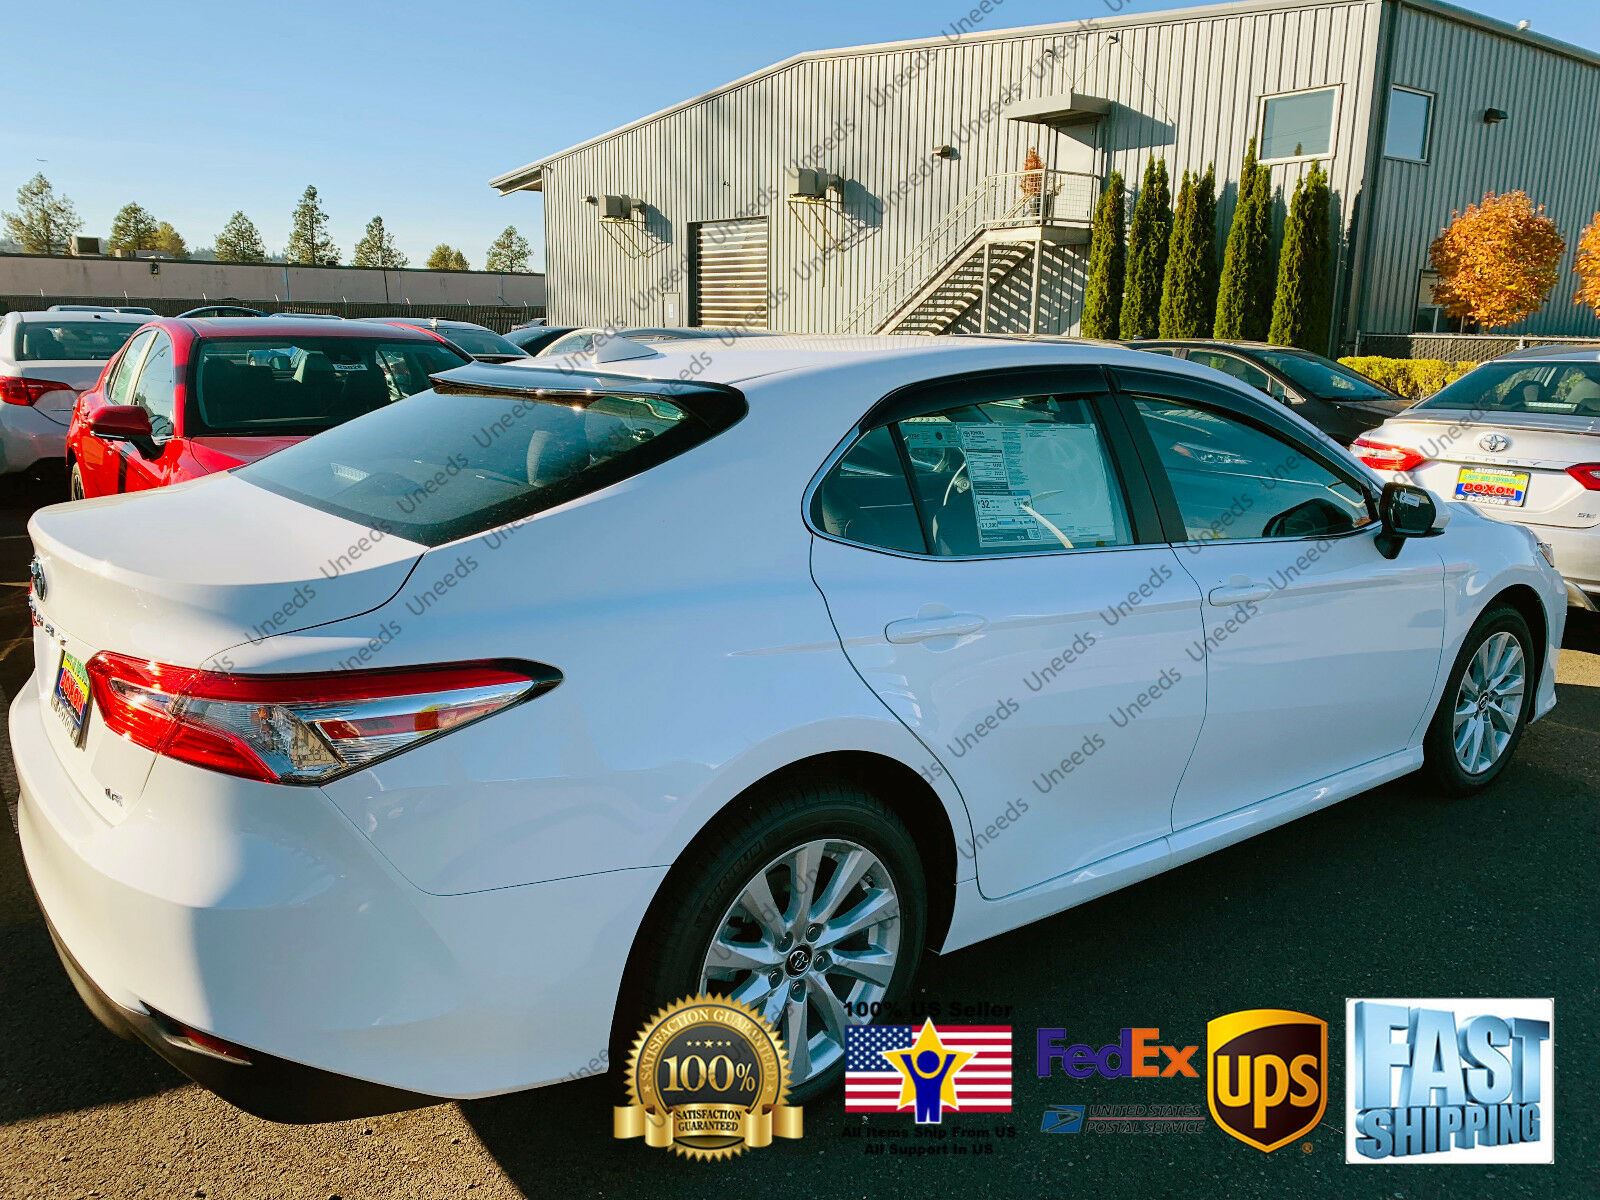 Fit 2018-2023 TOYOTA CAMRY Out-Channel Vent Window Visors Rain Sun Wind Guards Shade Deflectors